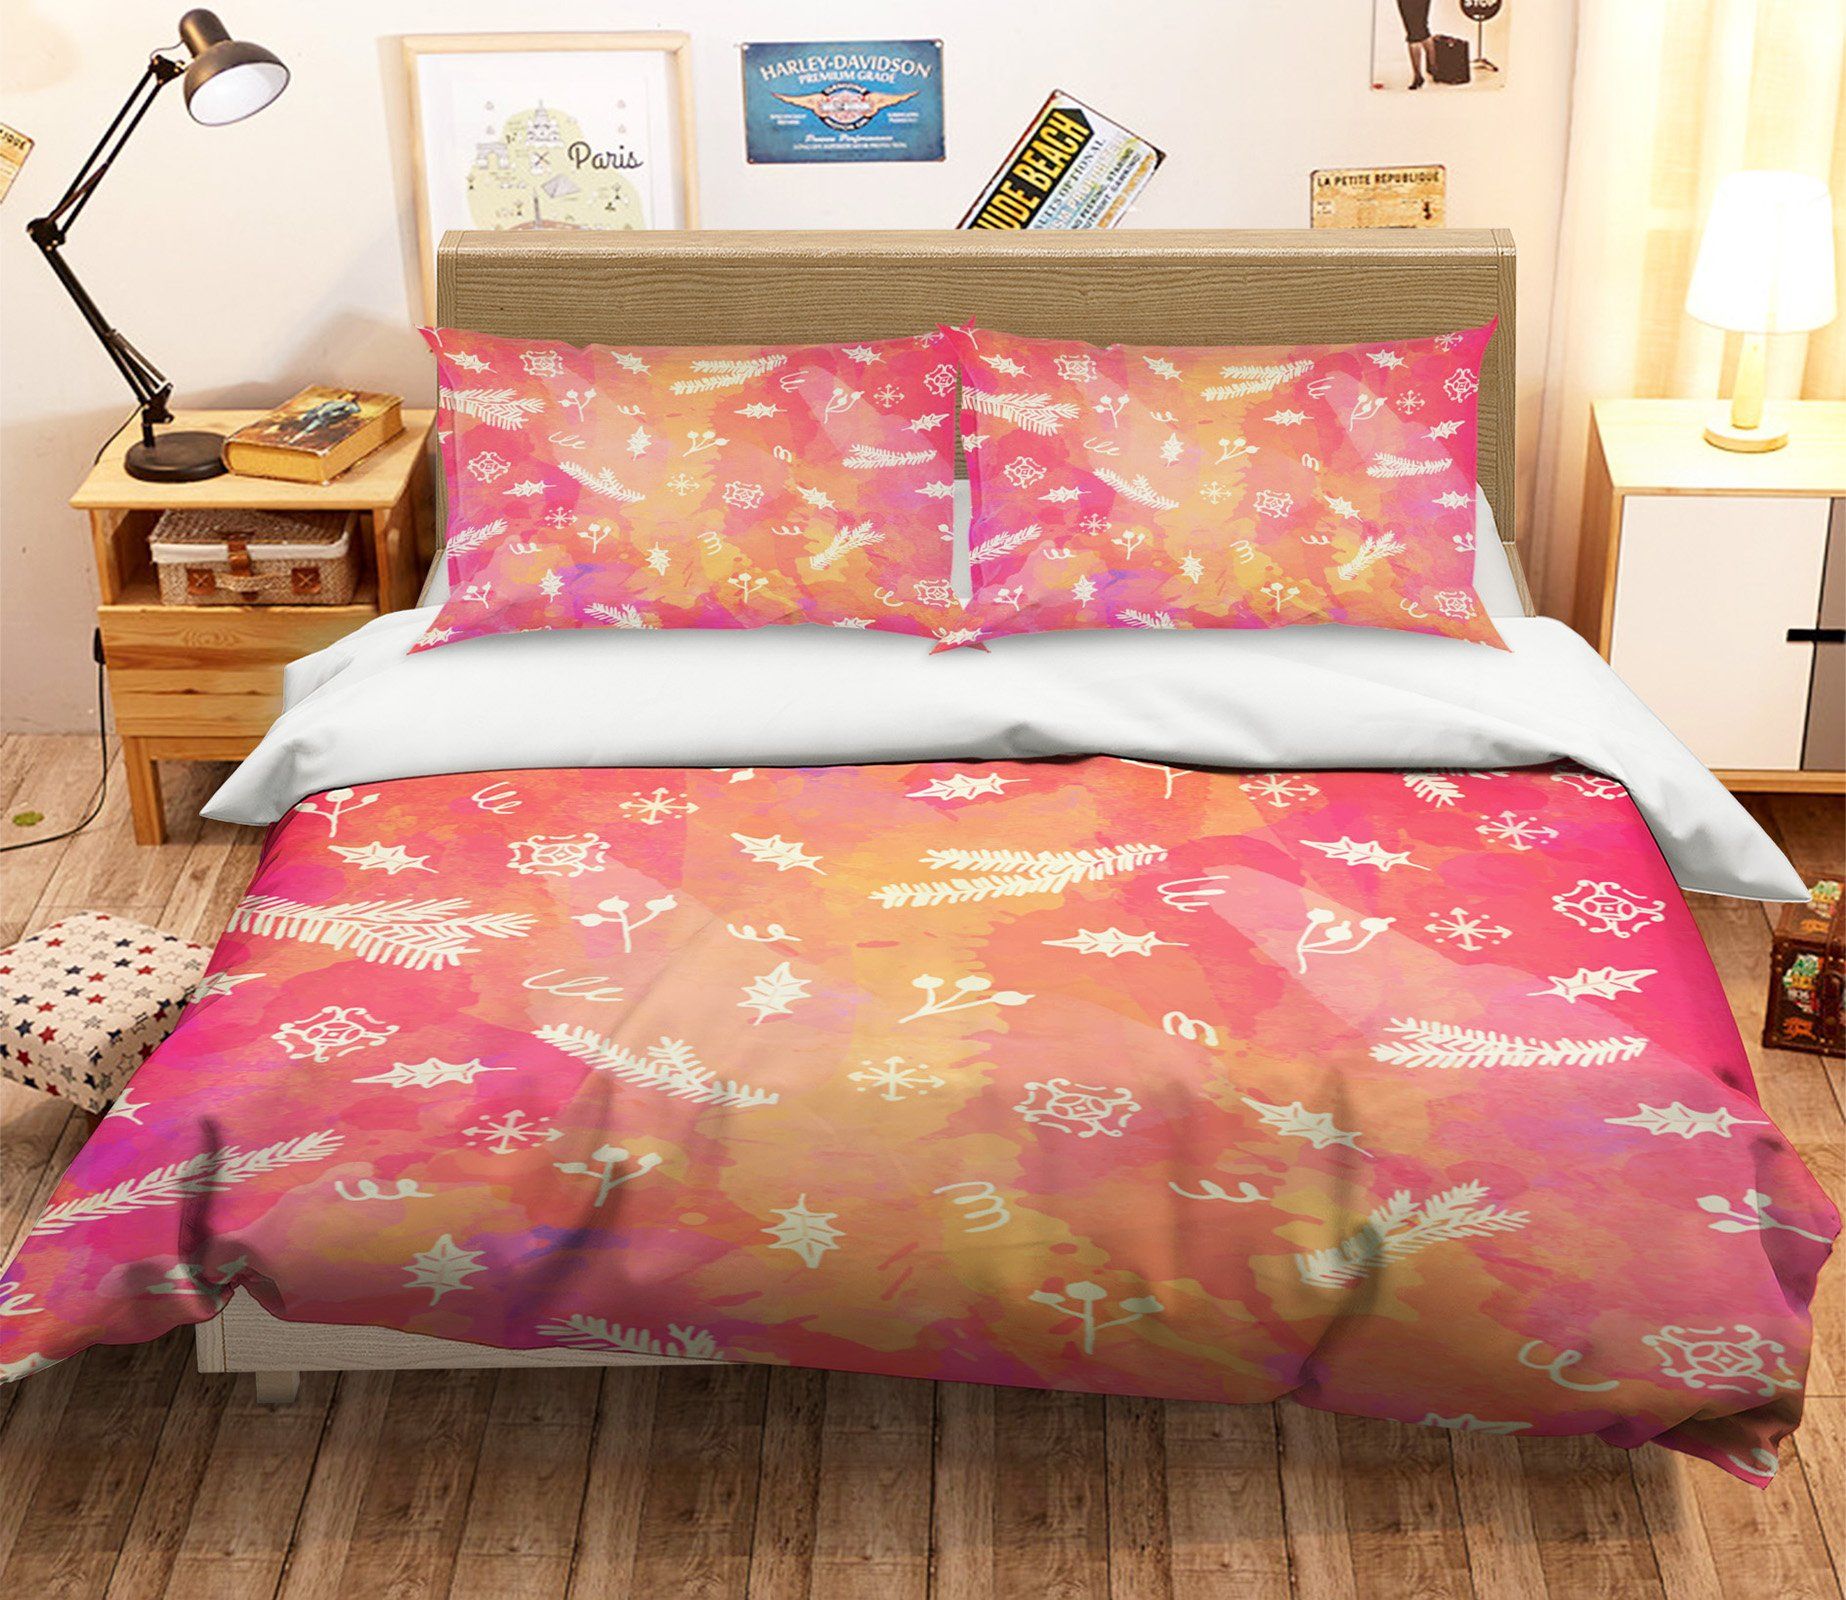 3D Christmas Falling Leaves 20 Bed Pillowcases Quilt Quiet Covers AJ Creativity Home 